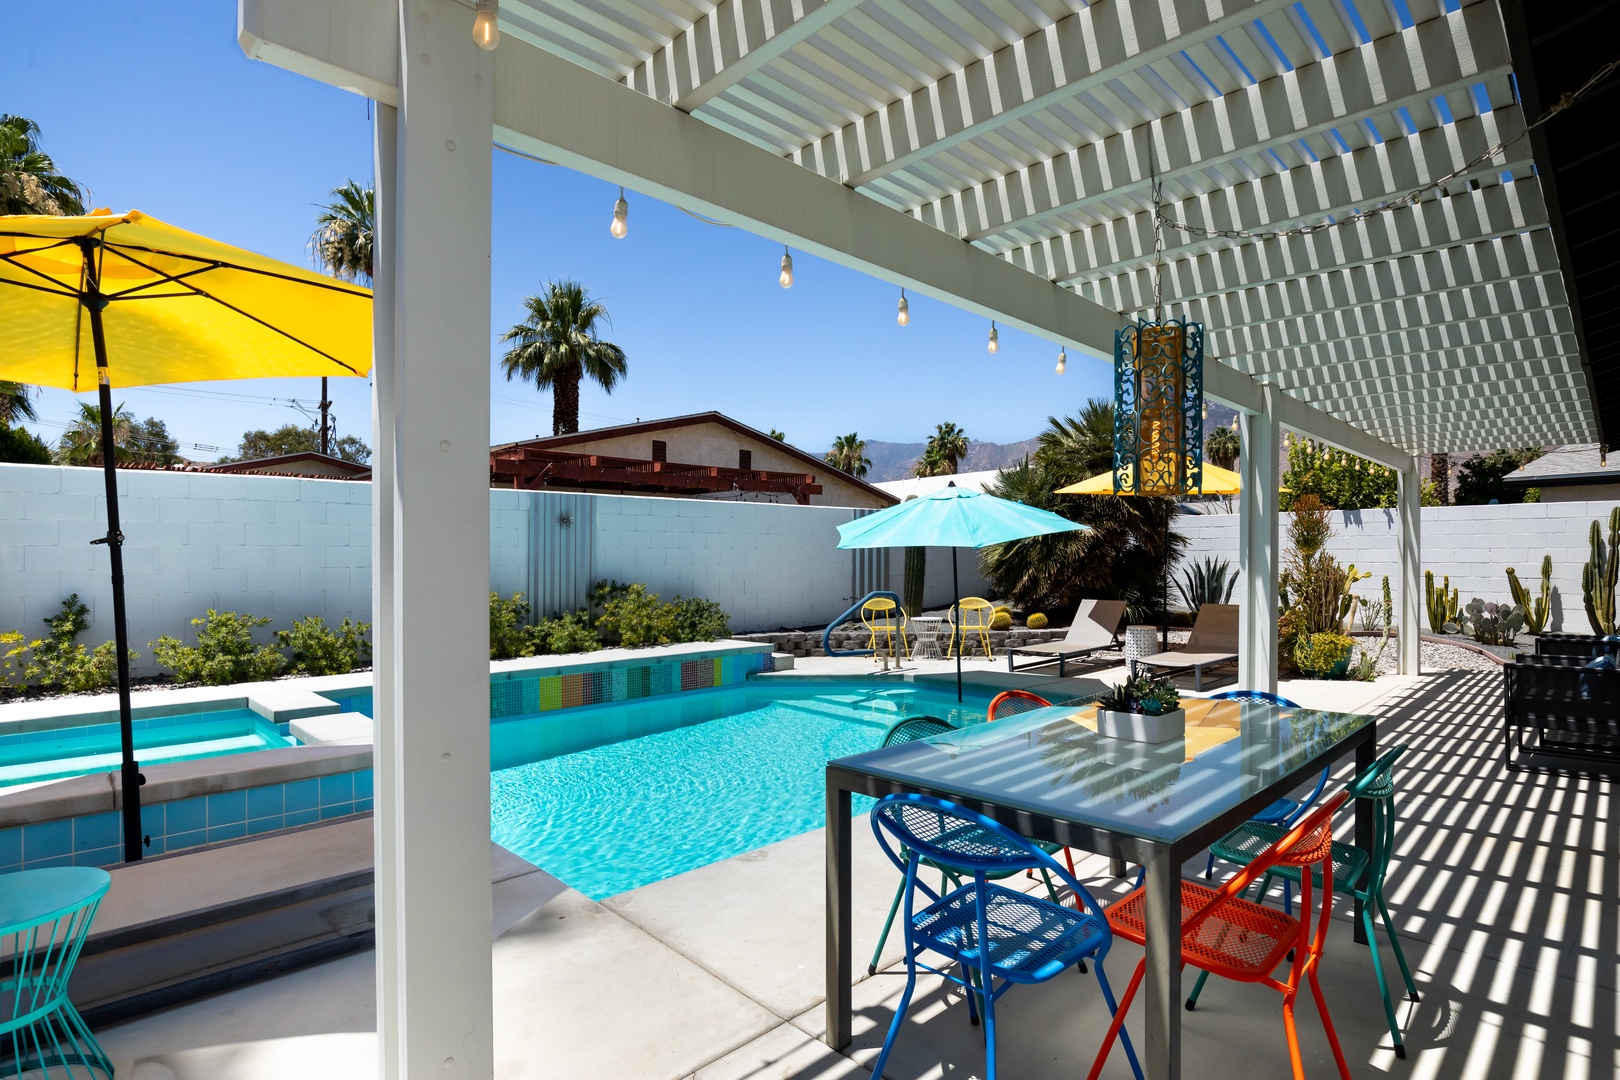 Lounge & dine in the shade, just steps away from the saltwater pool